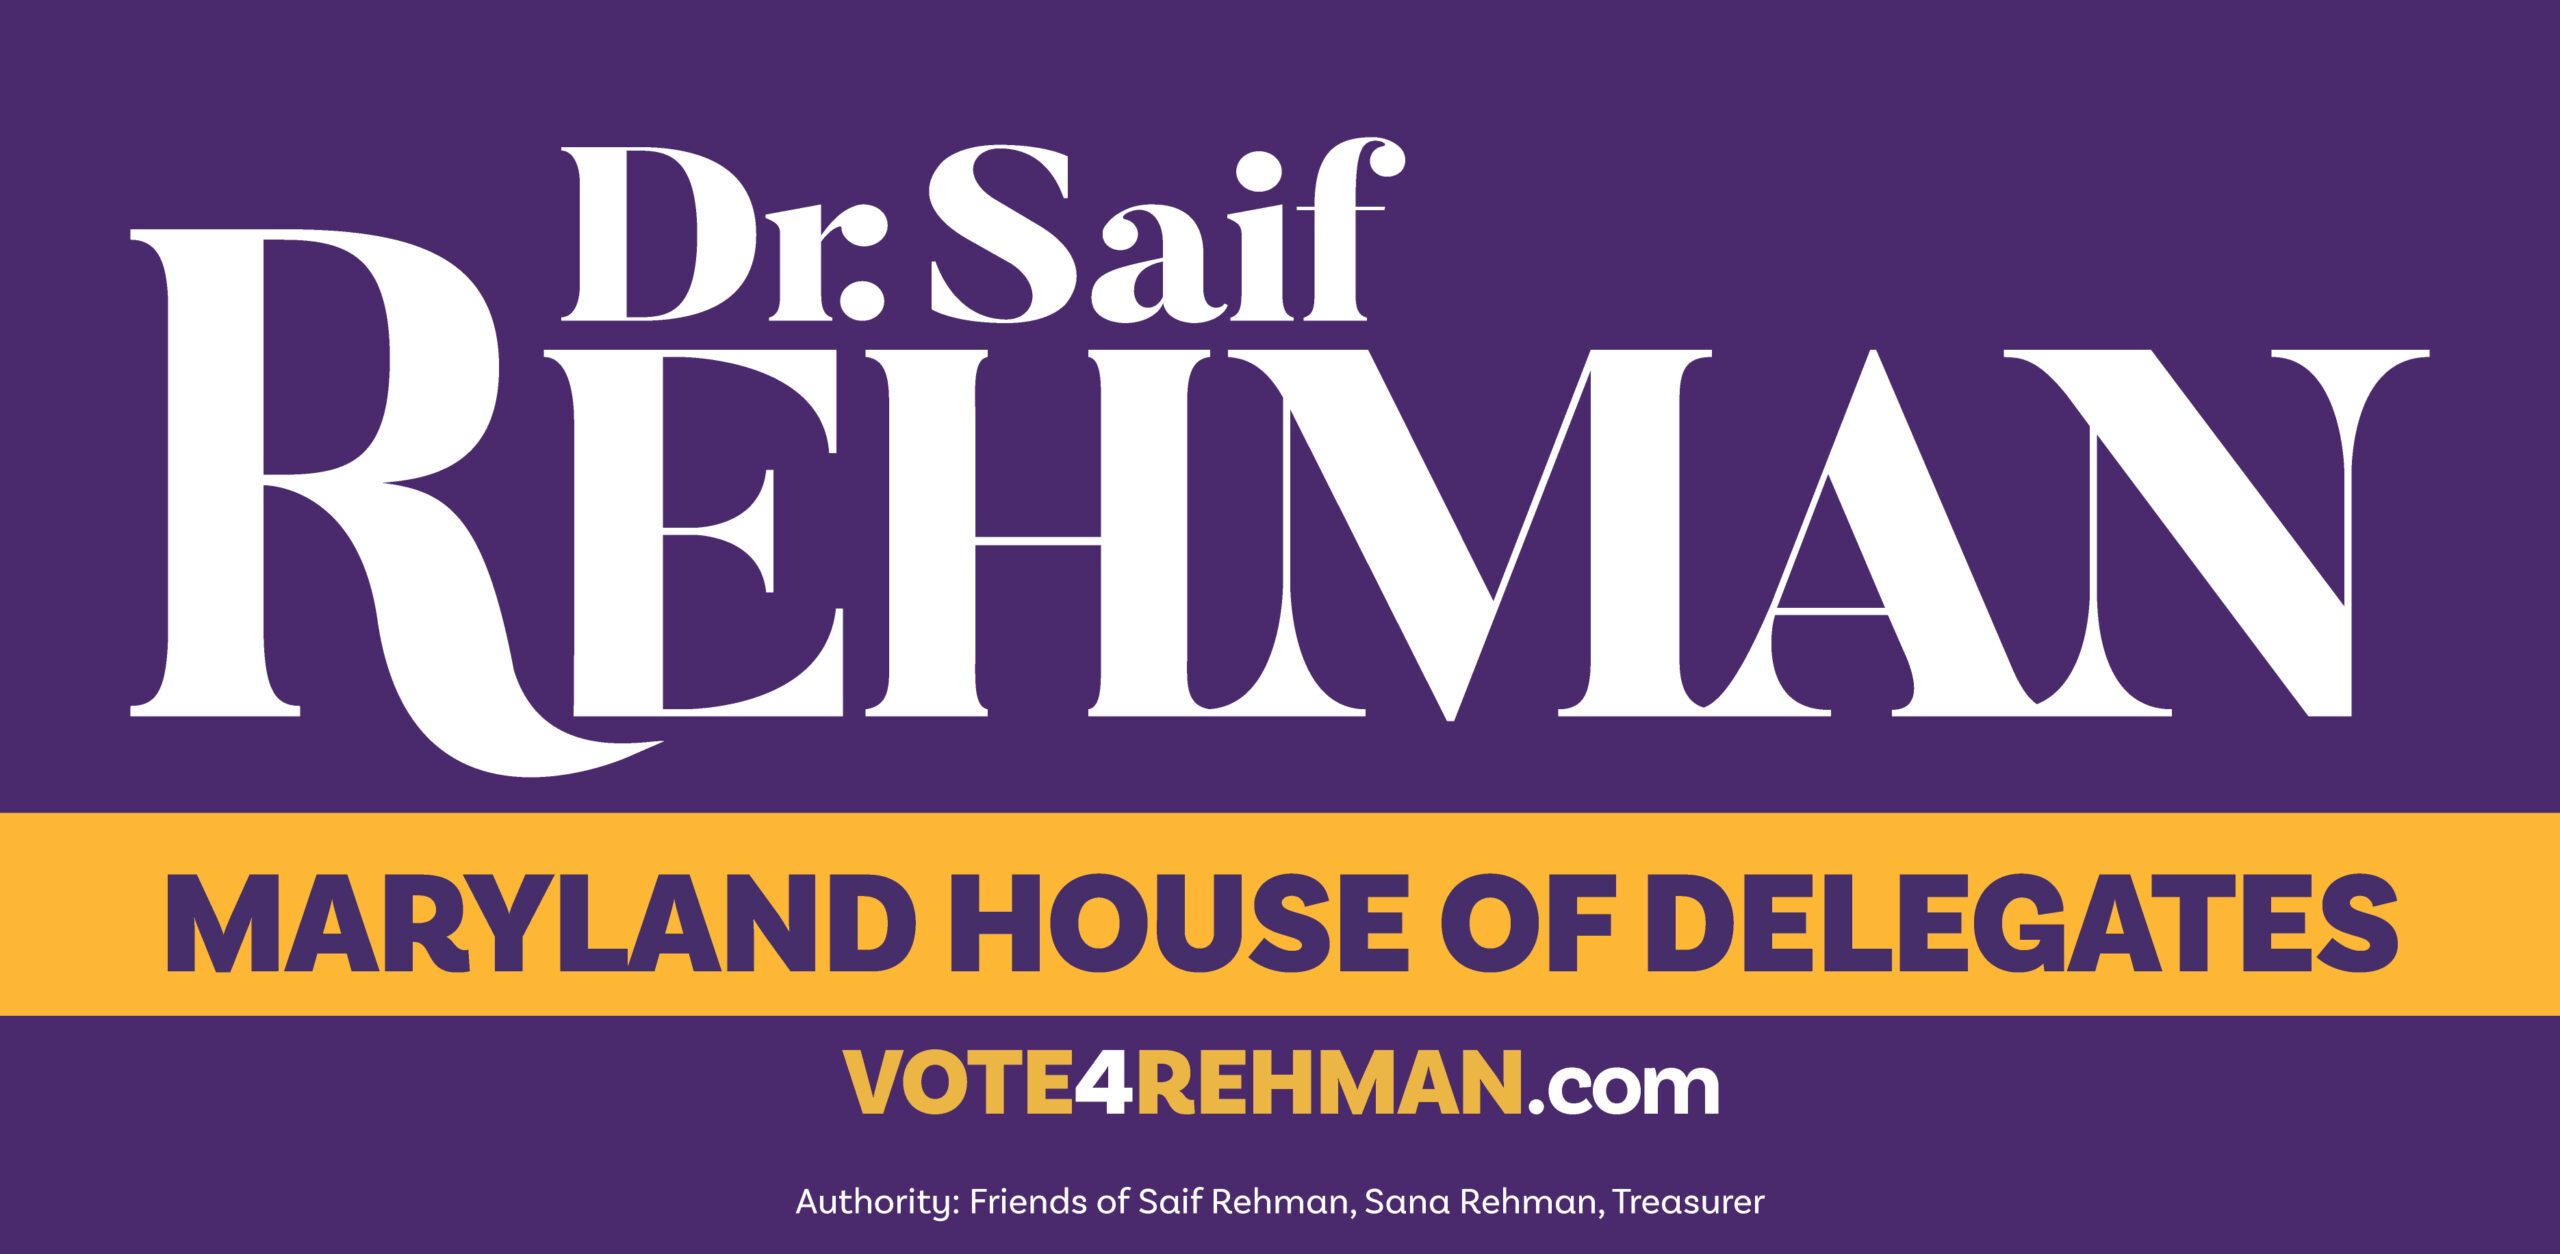 Dr. Saif Rehman for Maryland State Delegate